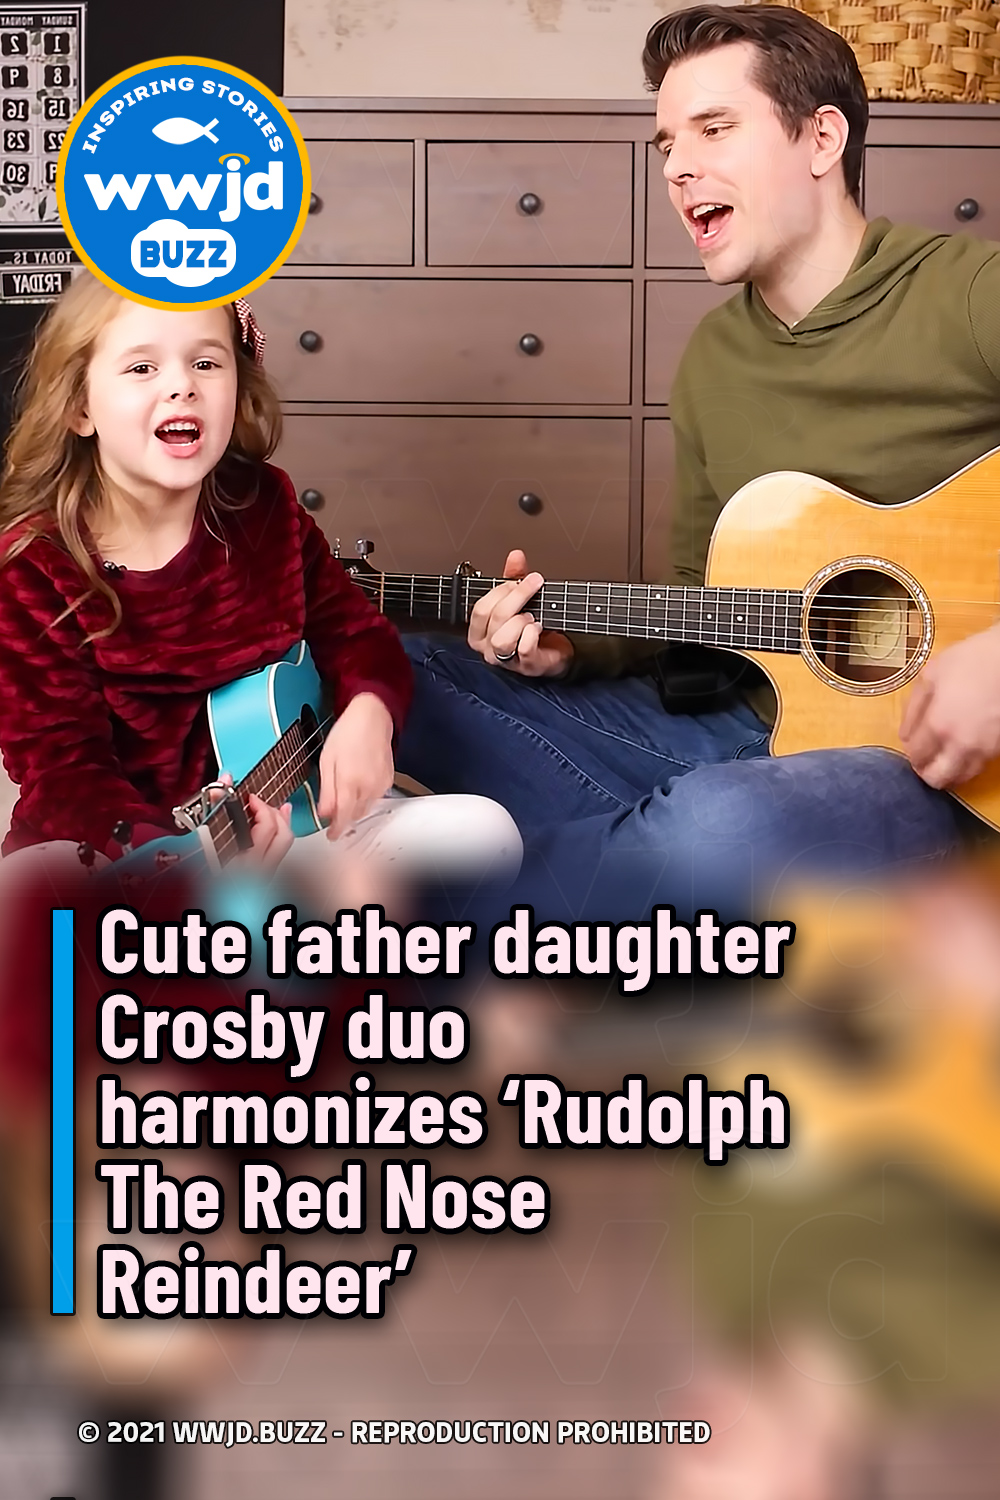 Cute father daughter Crosby duo harmonizes ‘Rudolph The Red Nose Reindeer’